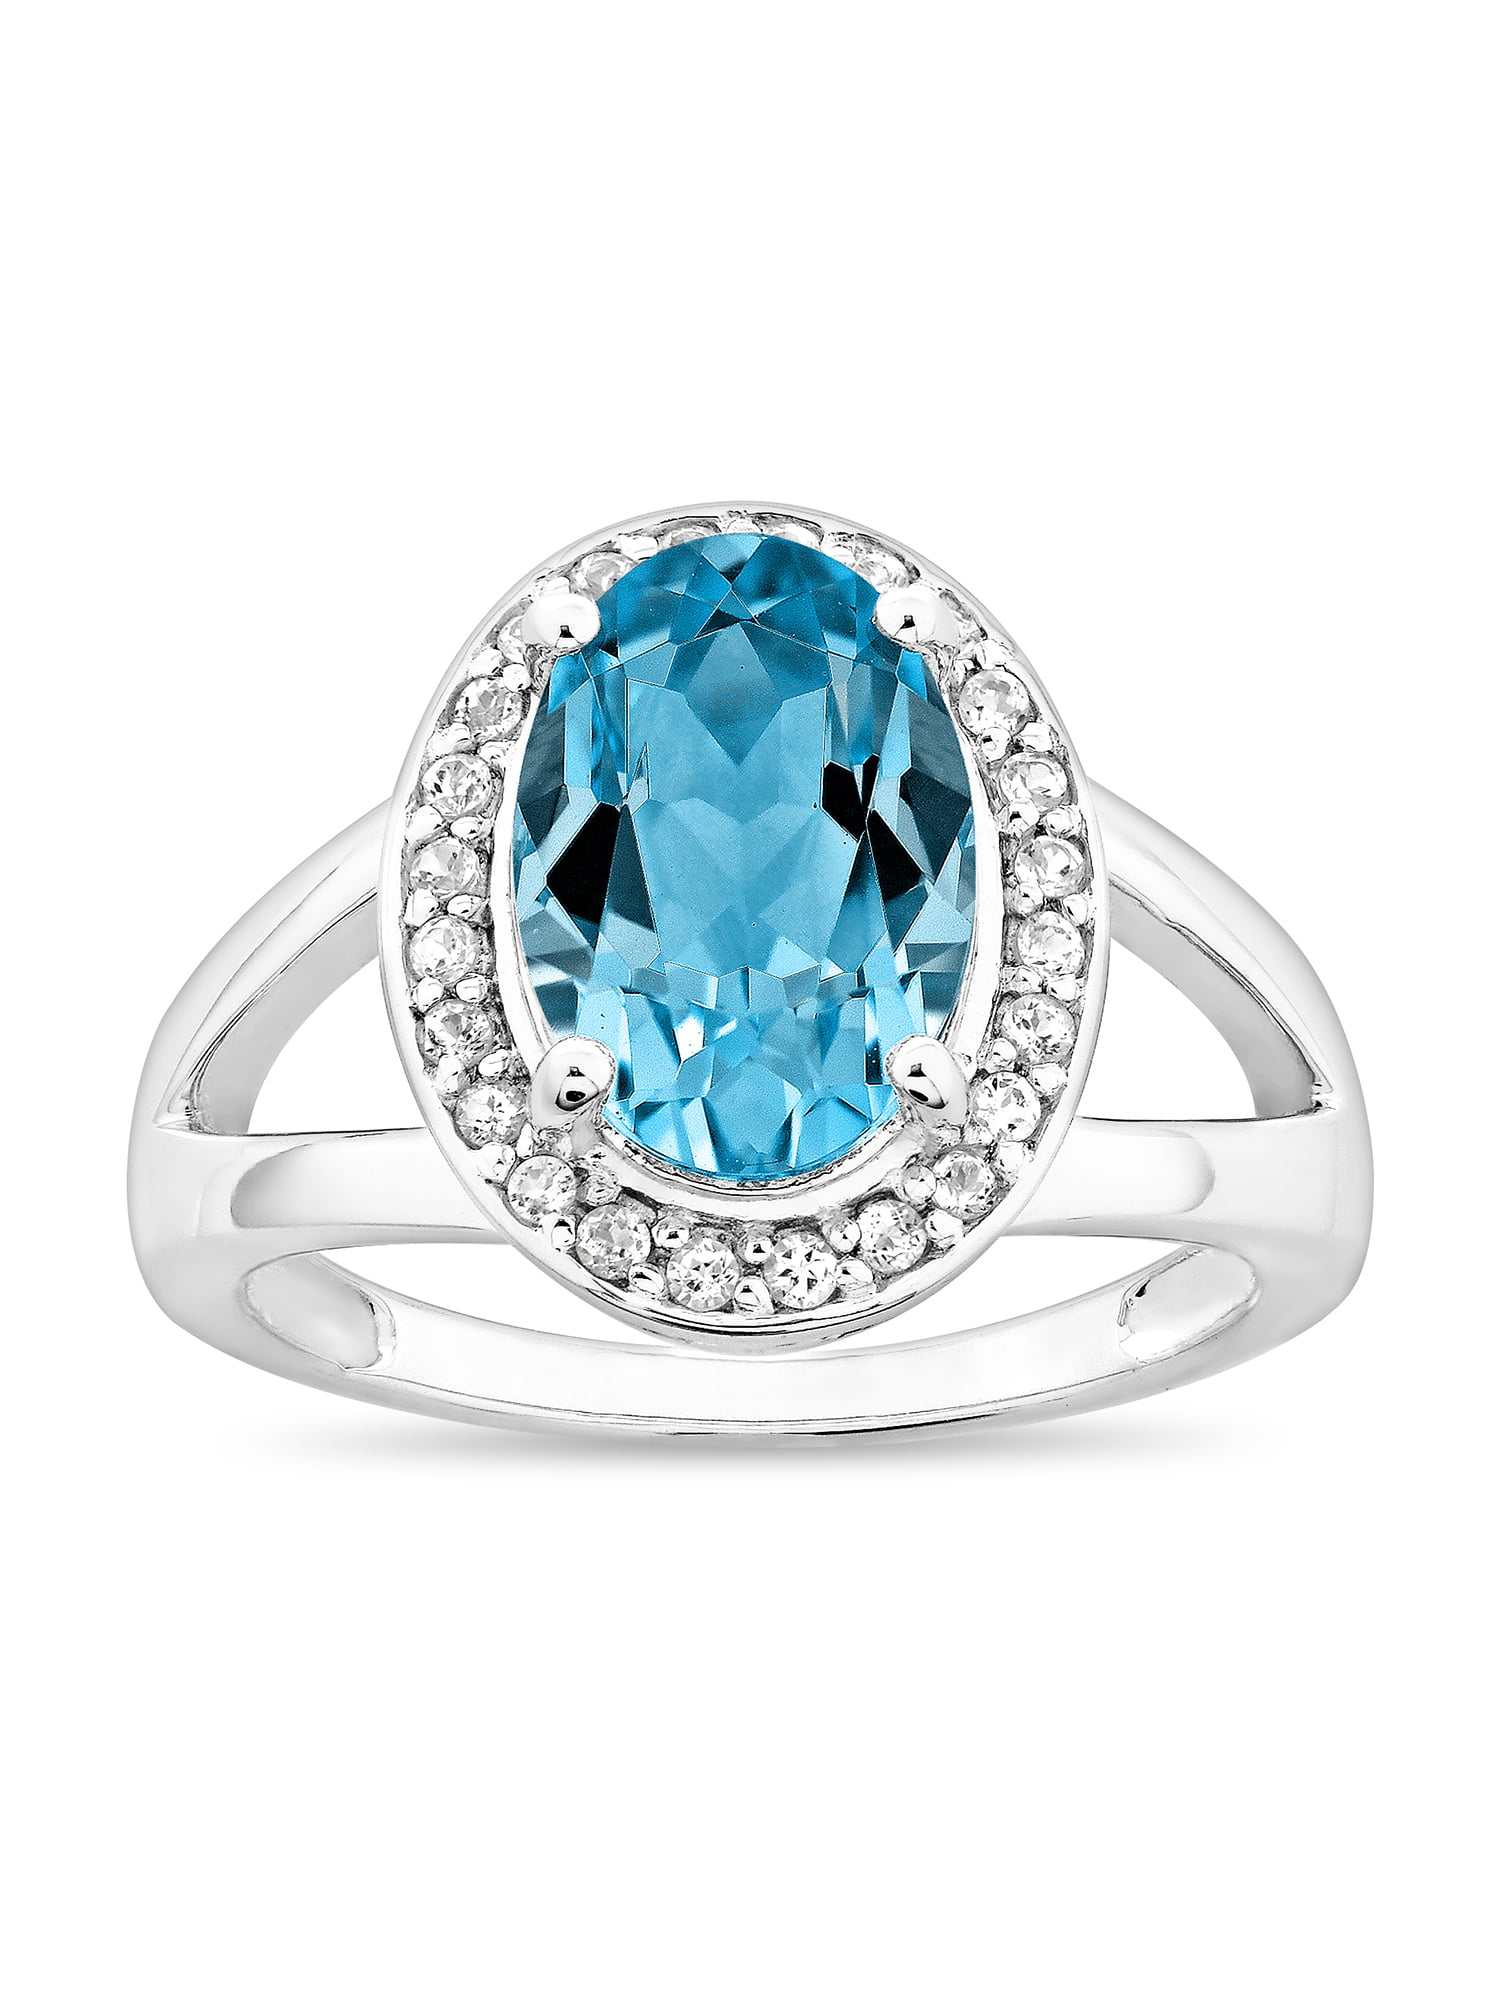 4.74 ct. Blue Topaz and White Topaz Sterling Silver Ring - Walmart.com